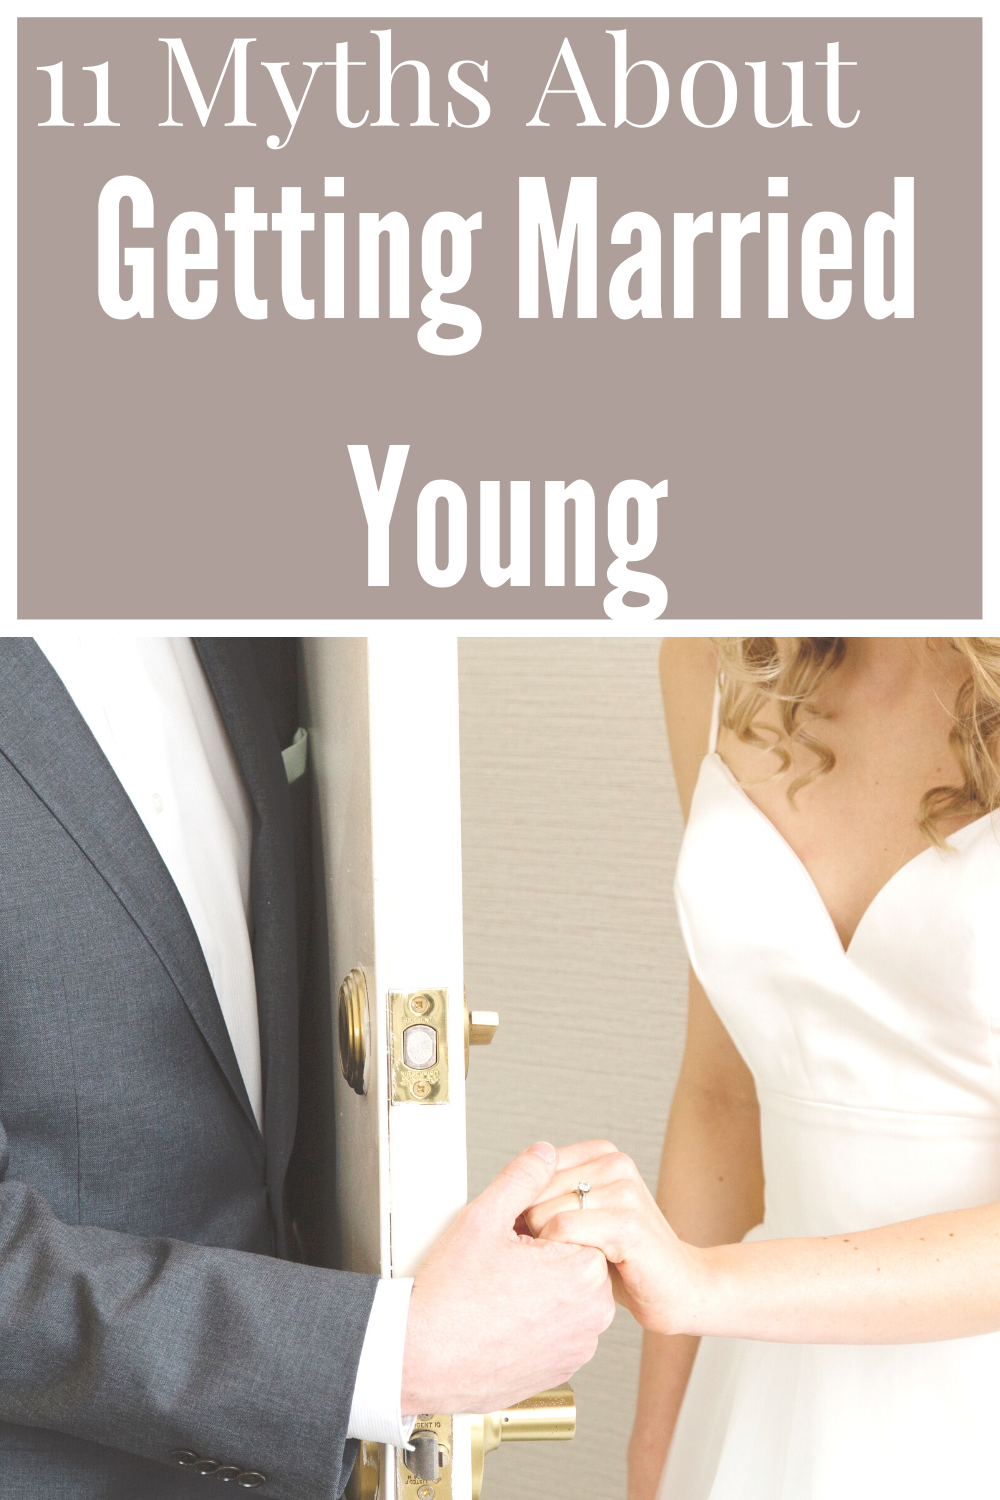 Myths About Getting Married Young Pinterest Pin